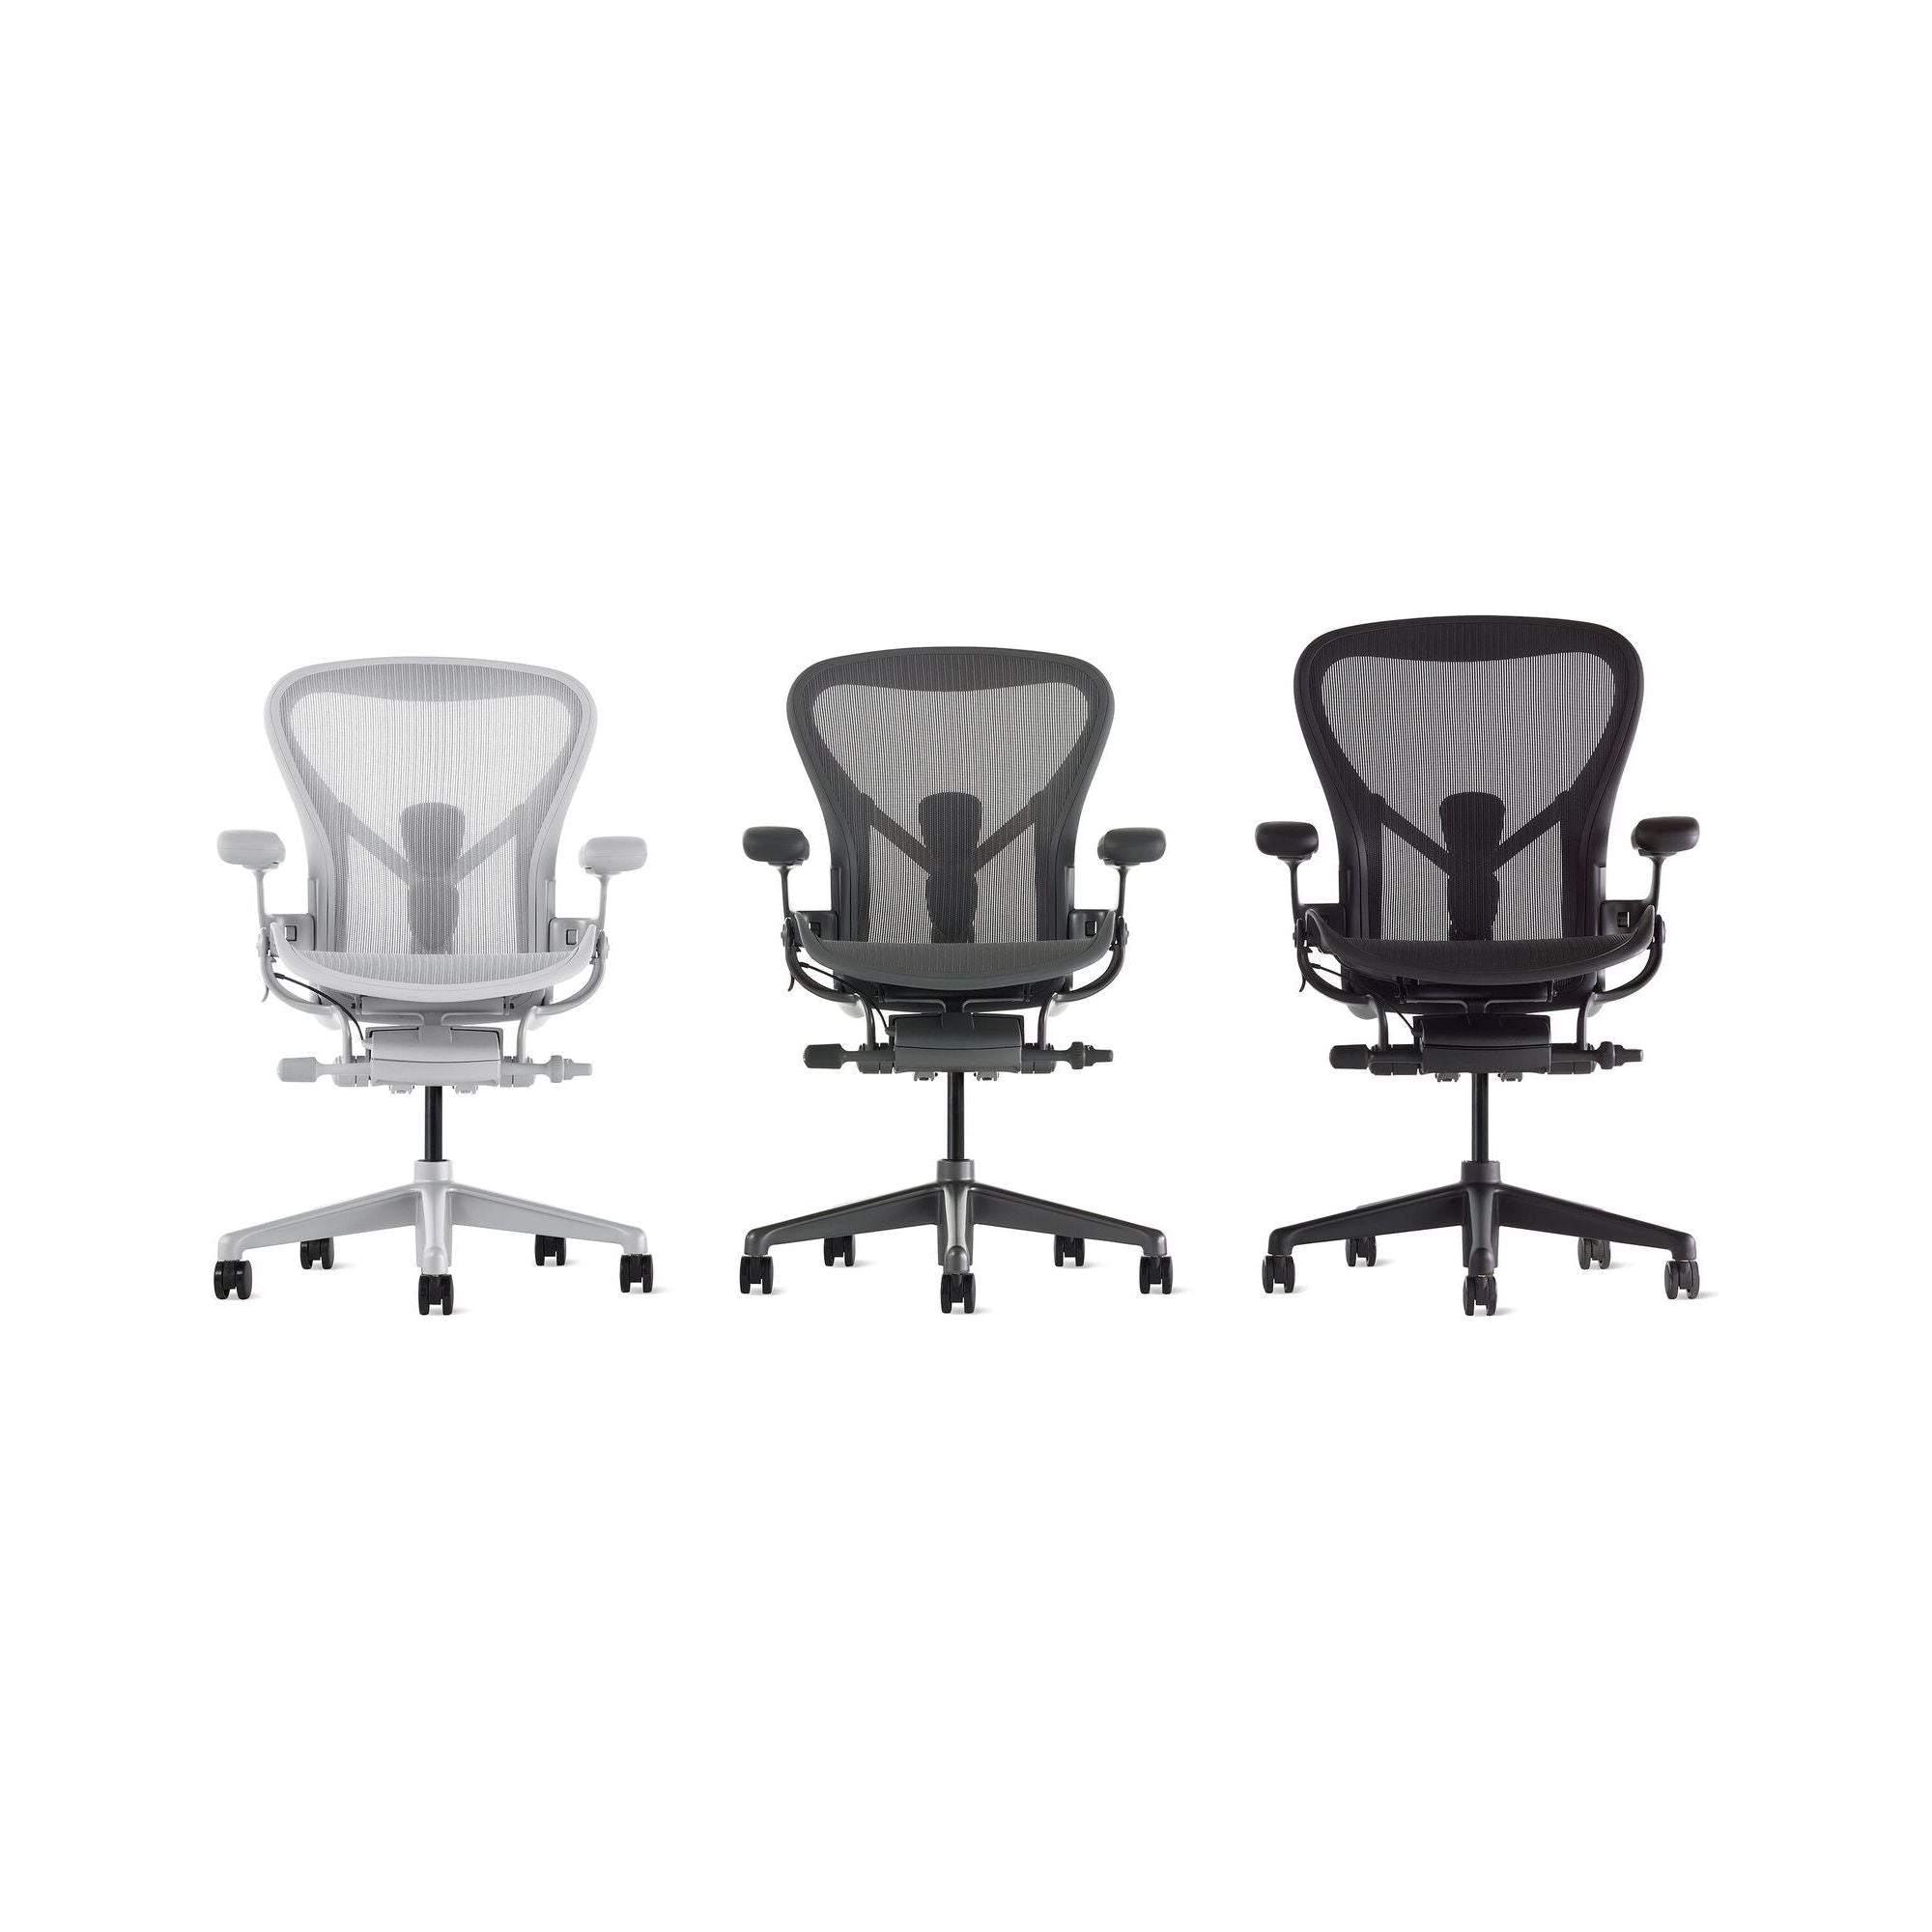 Herman Miller Aeron Chair carbon frame with Satin Carbon Base and Chassis